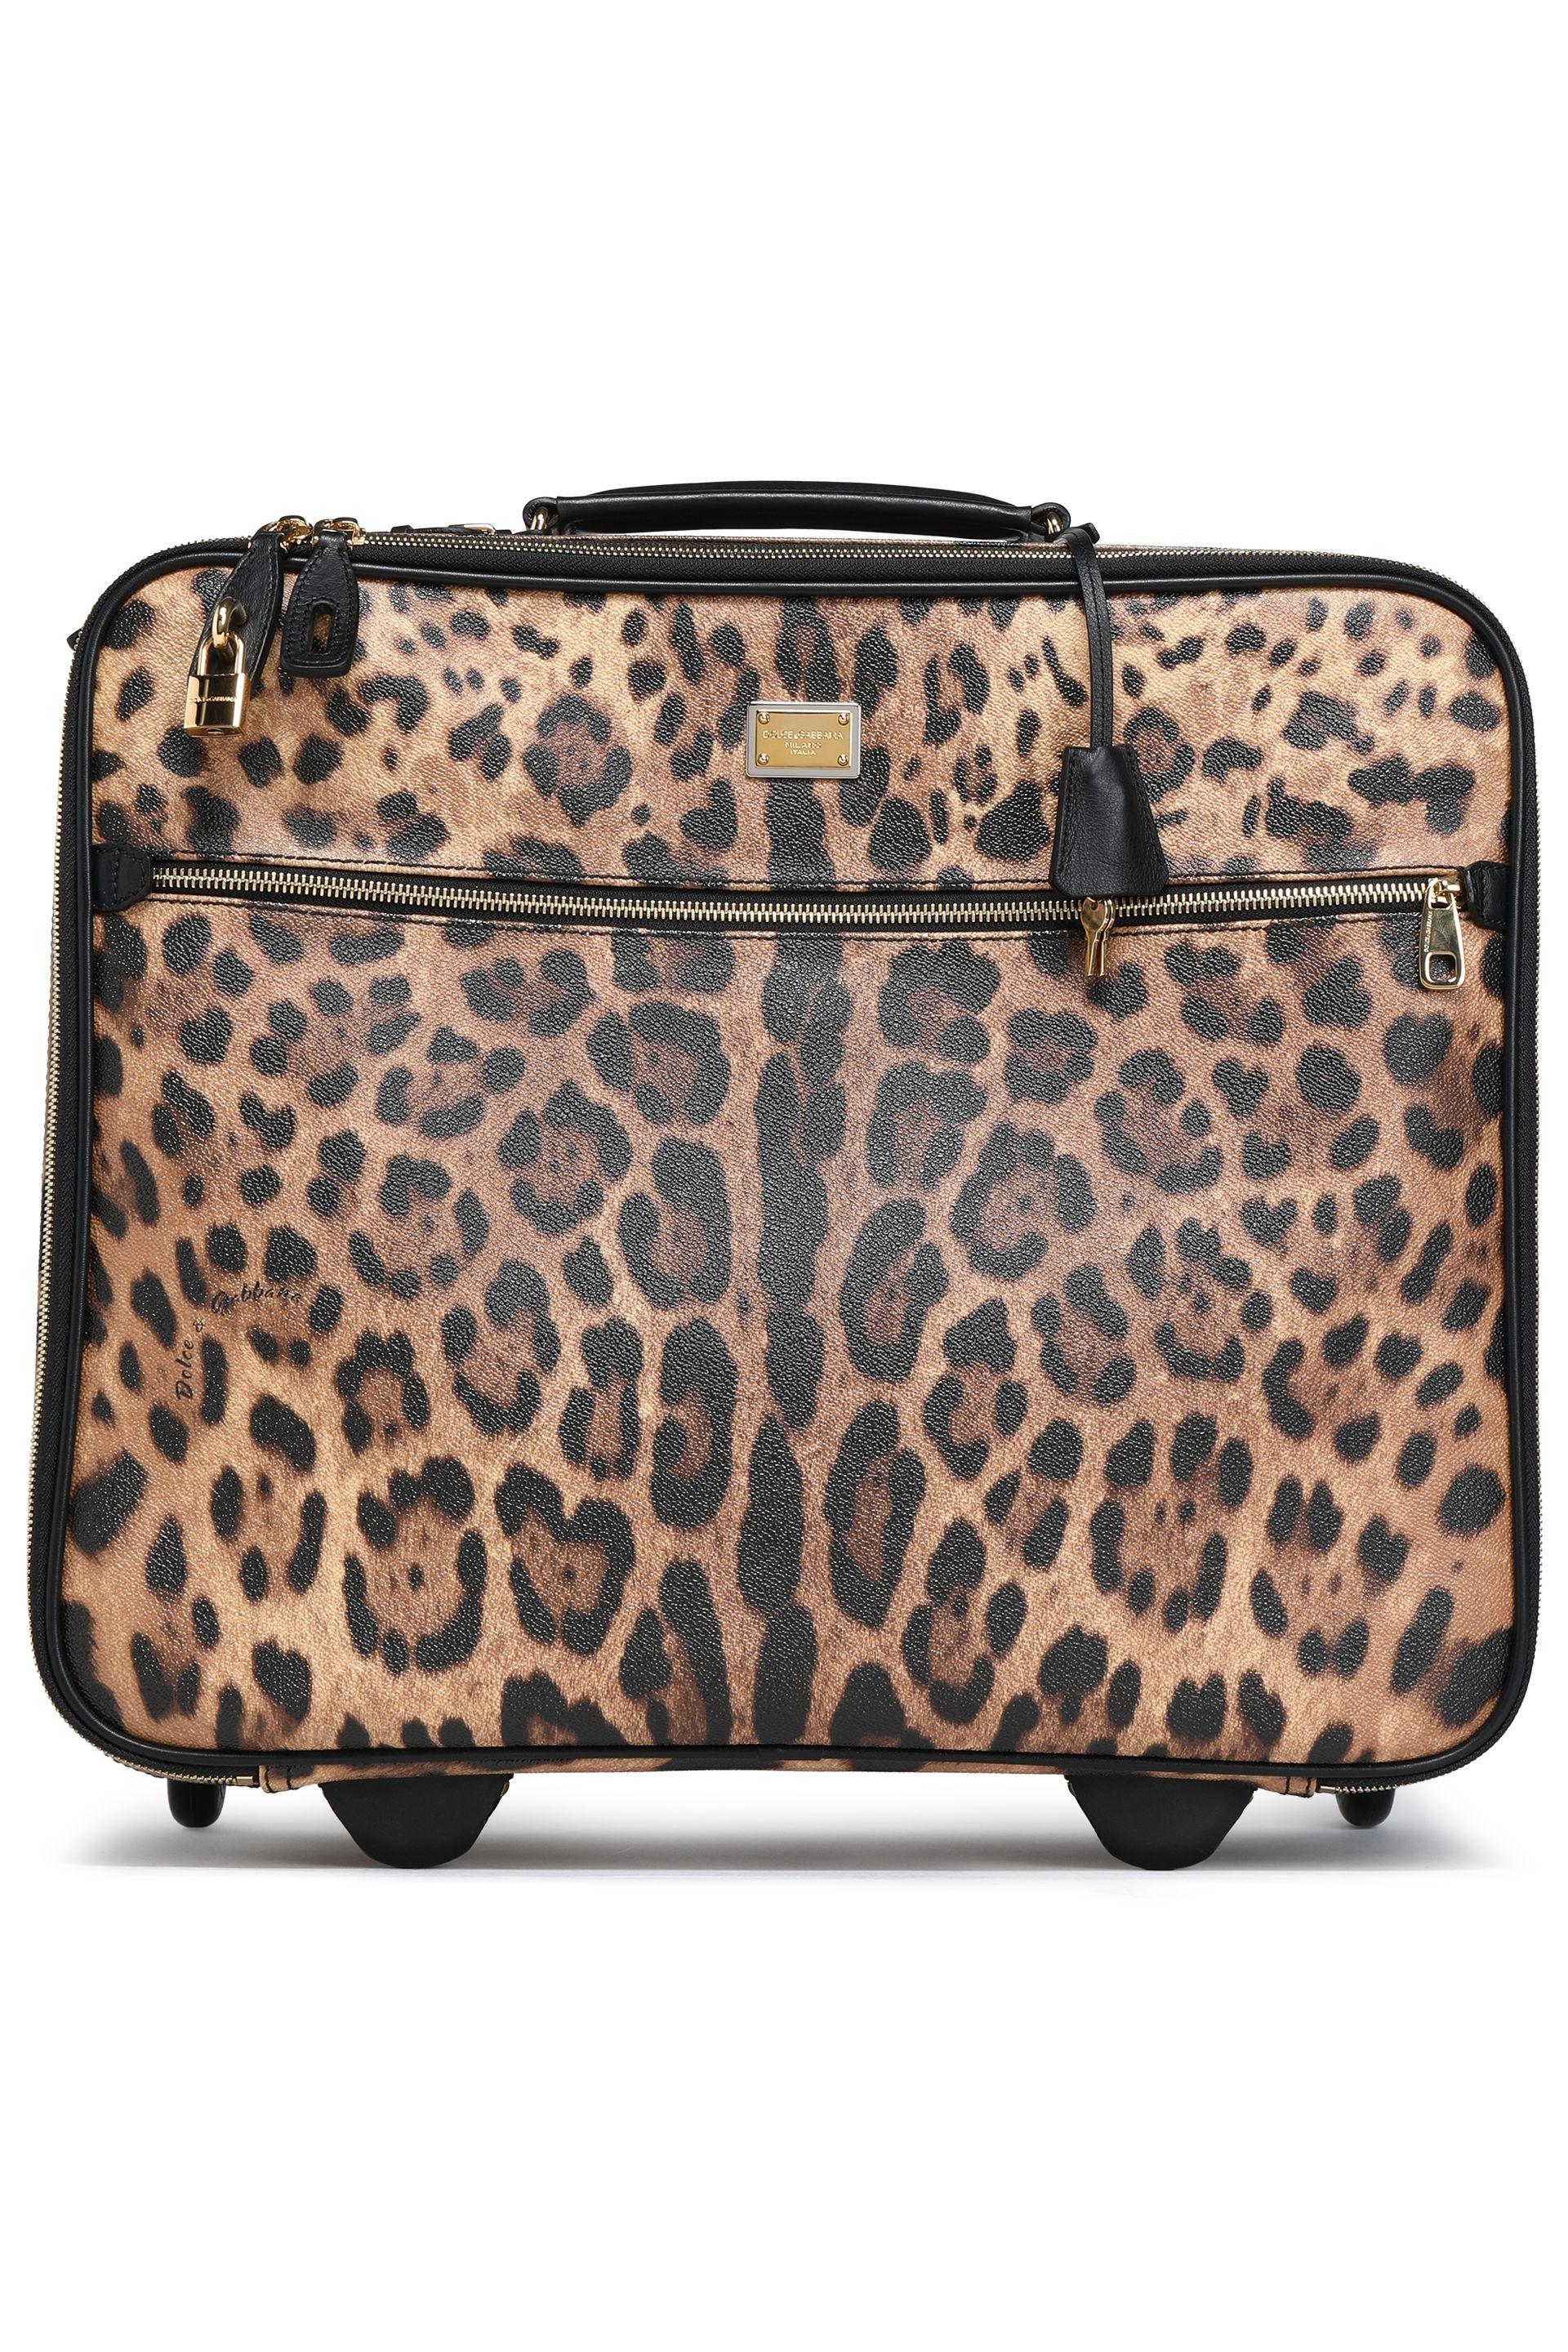 Dolce & Gabbana Woman Leopard-print Textured-leather Suitcase Animal Print  | Lyst